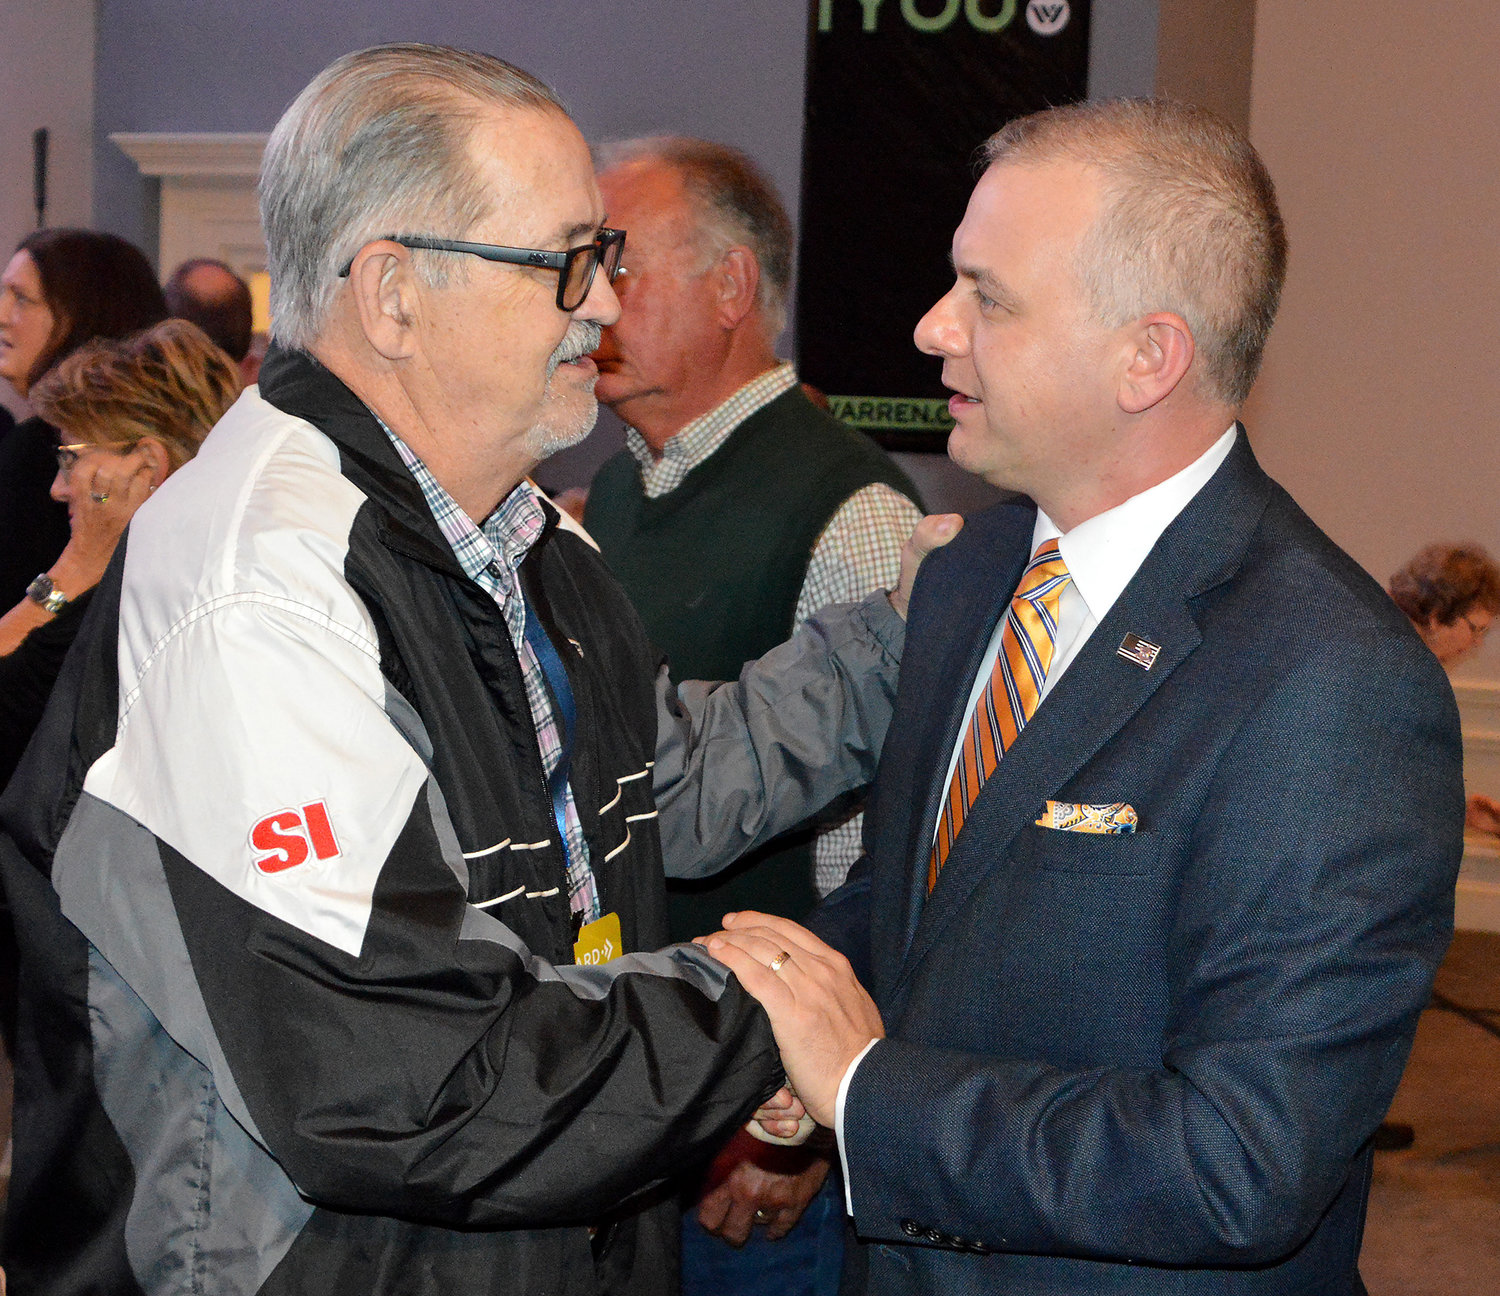 Jerry Cross, pastor of StraightForward Church, congratulates Josh Saefkow after he was elected president of the Georgia Baptist Convention at the 200th annual meeting of the GBC in Augusta, Ga., Tuesday, Nov. 15, 2022. (Index/Henry Durand)